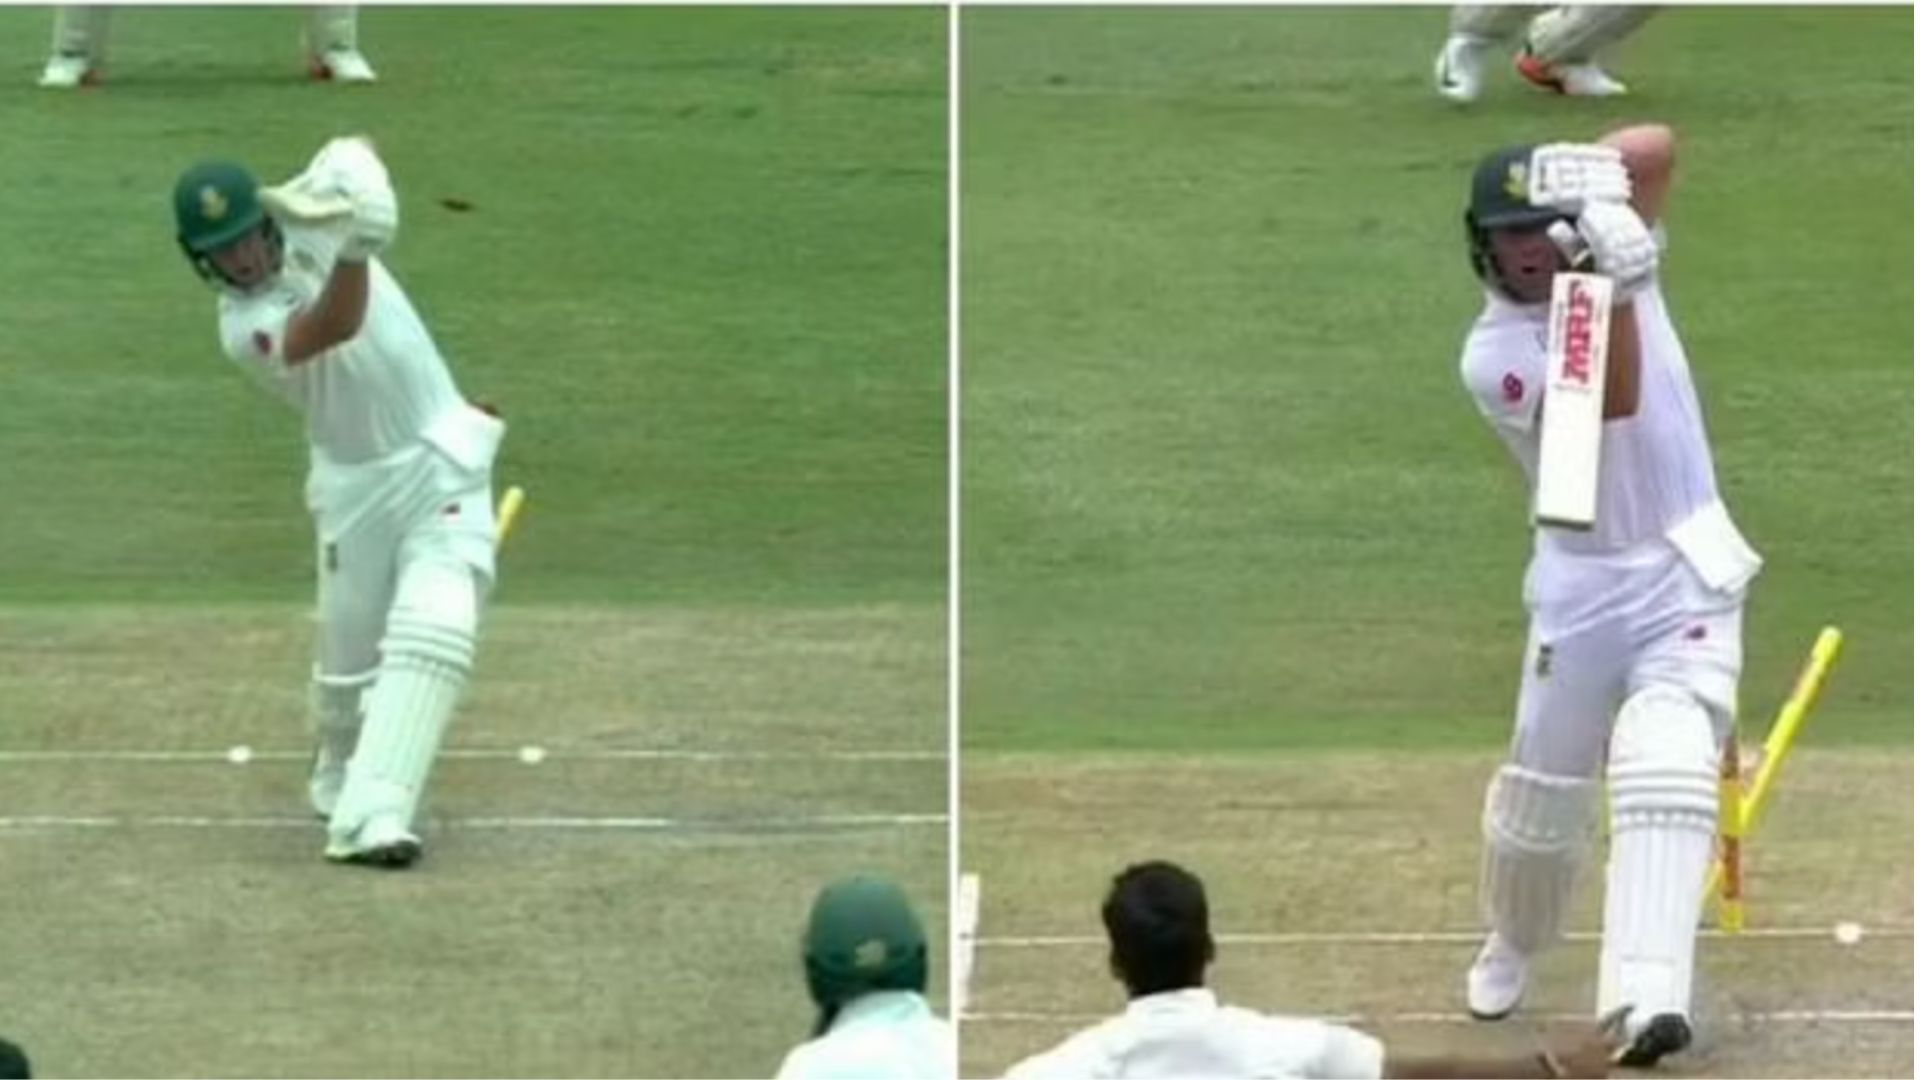 Ab de Villiers recalled an absolute ripper that he recieved from Bhuvneshwar back in 2018 